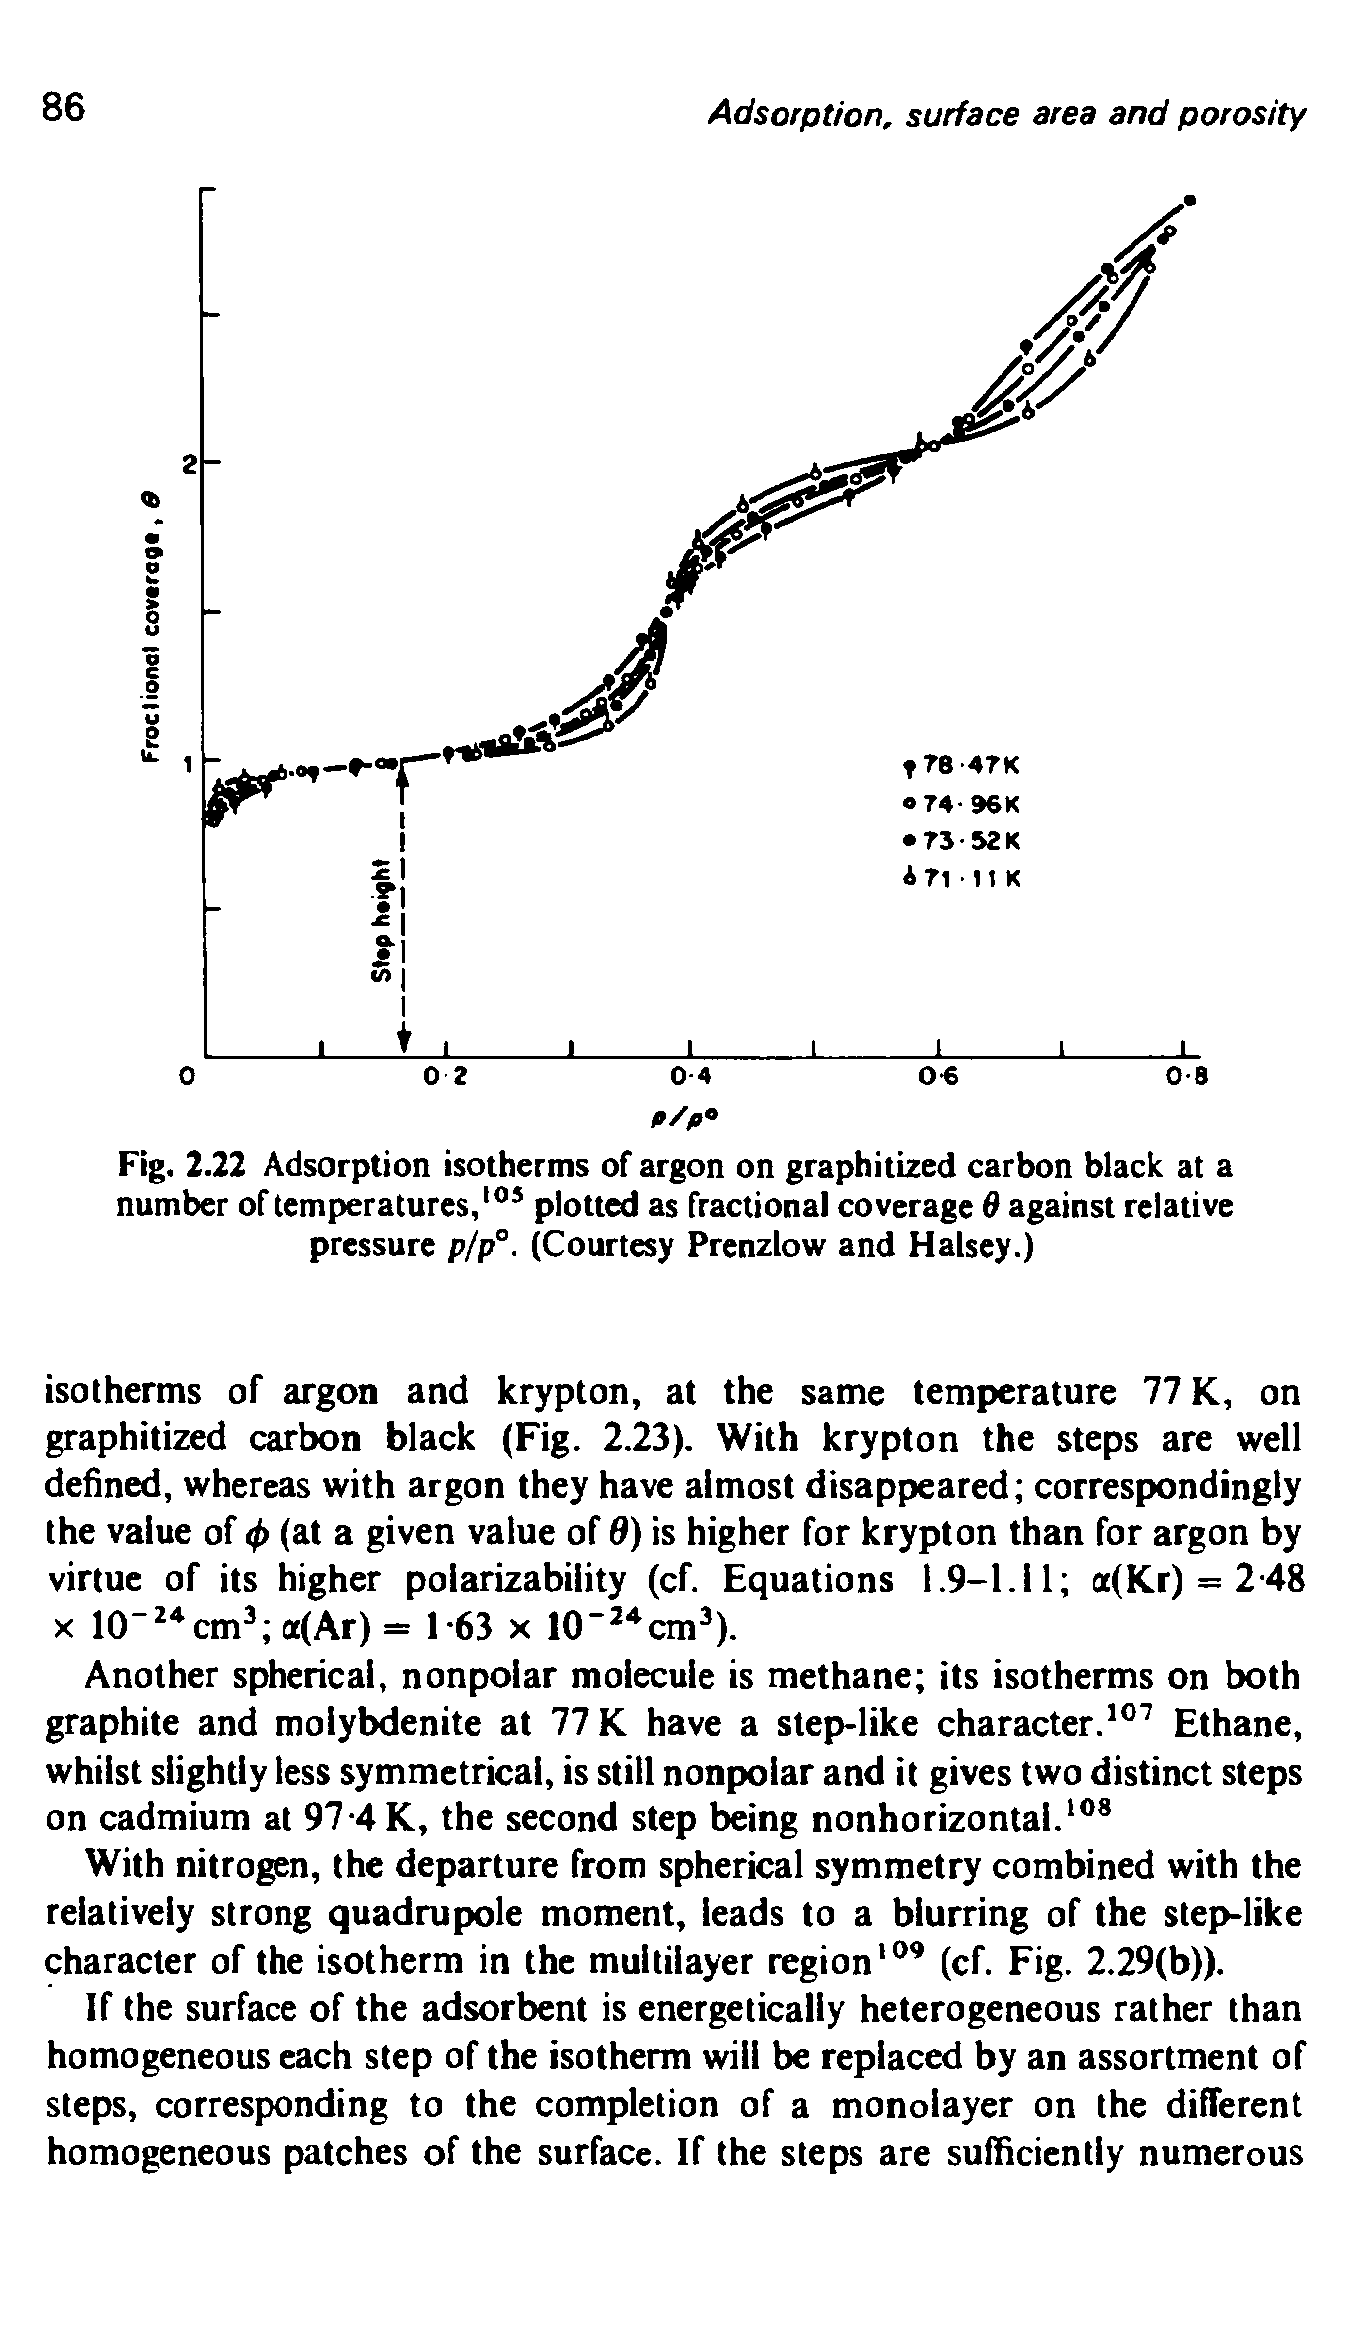 Fig. 2.22 Adsorption isotherms of argon on graphitized carbon black at a number of temperatures," plotted as fractional coverage 0 against relative pressure p/p°. (Courtesy Prenzlow and Halsey.)...